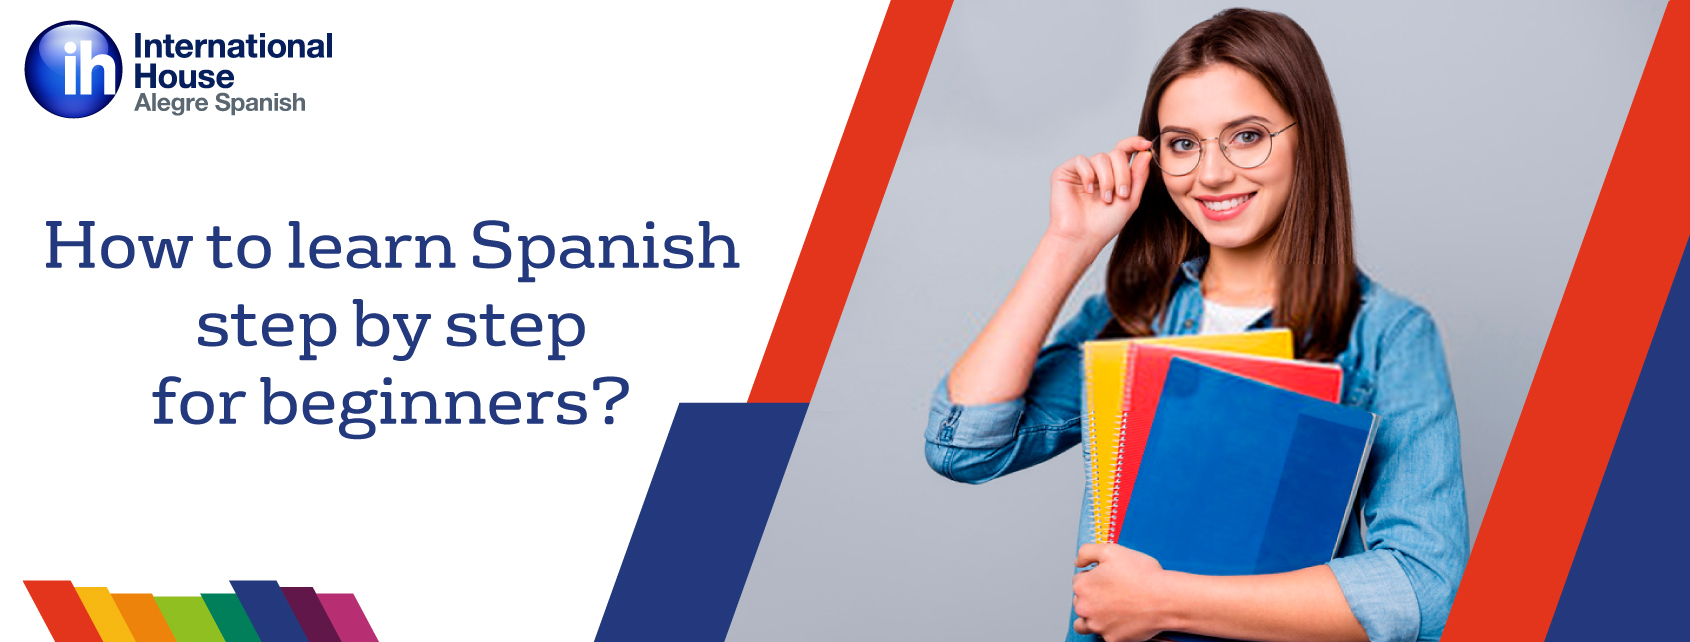 How to learn Spanish step by step for beginners